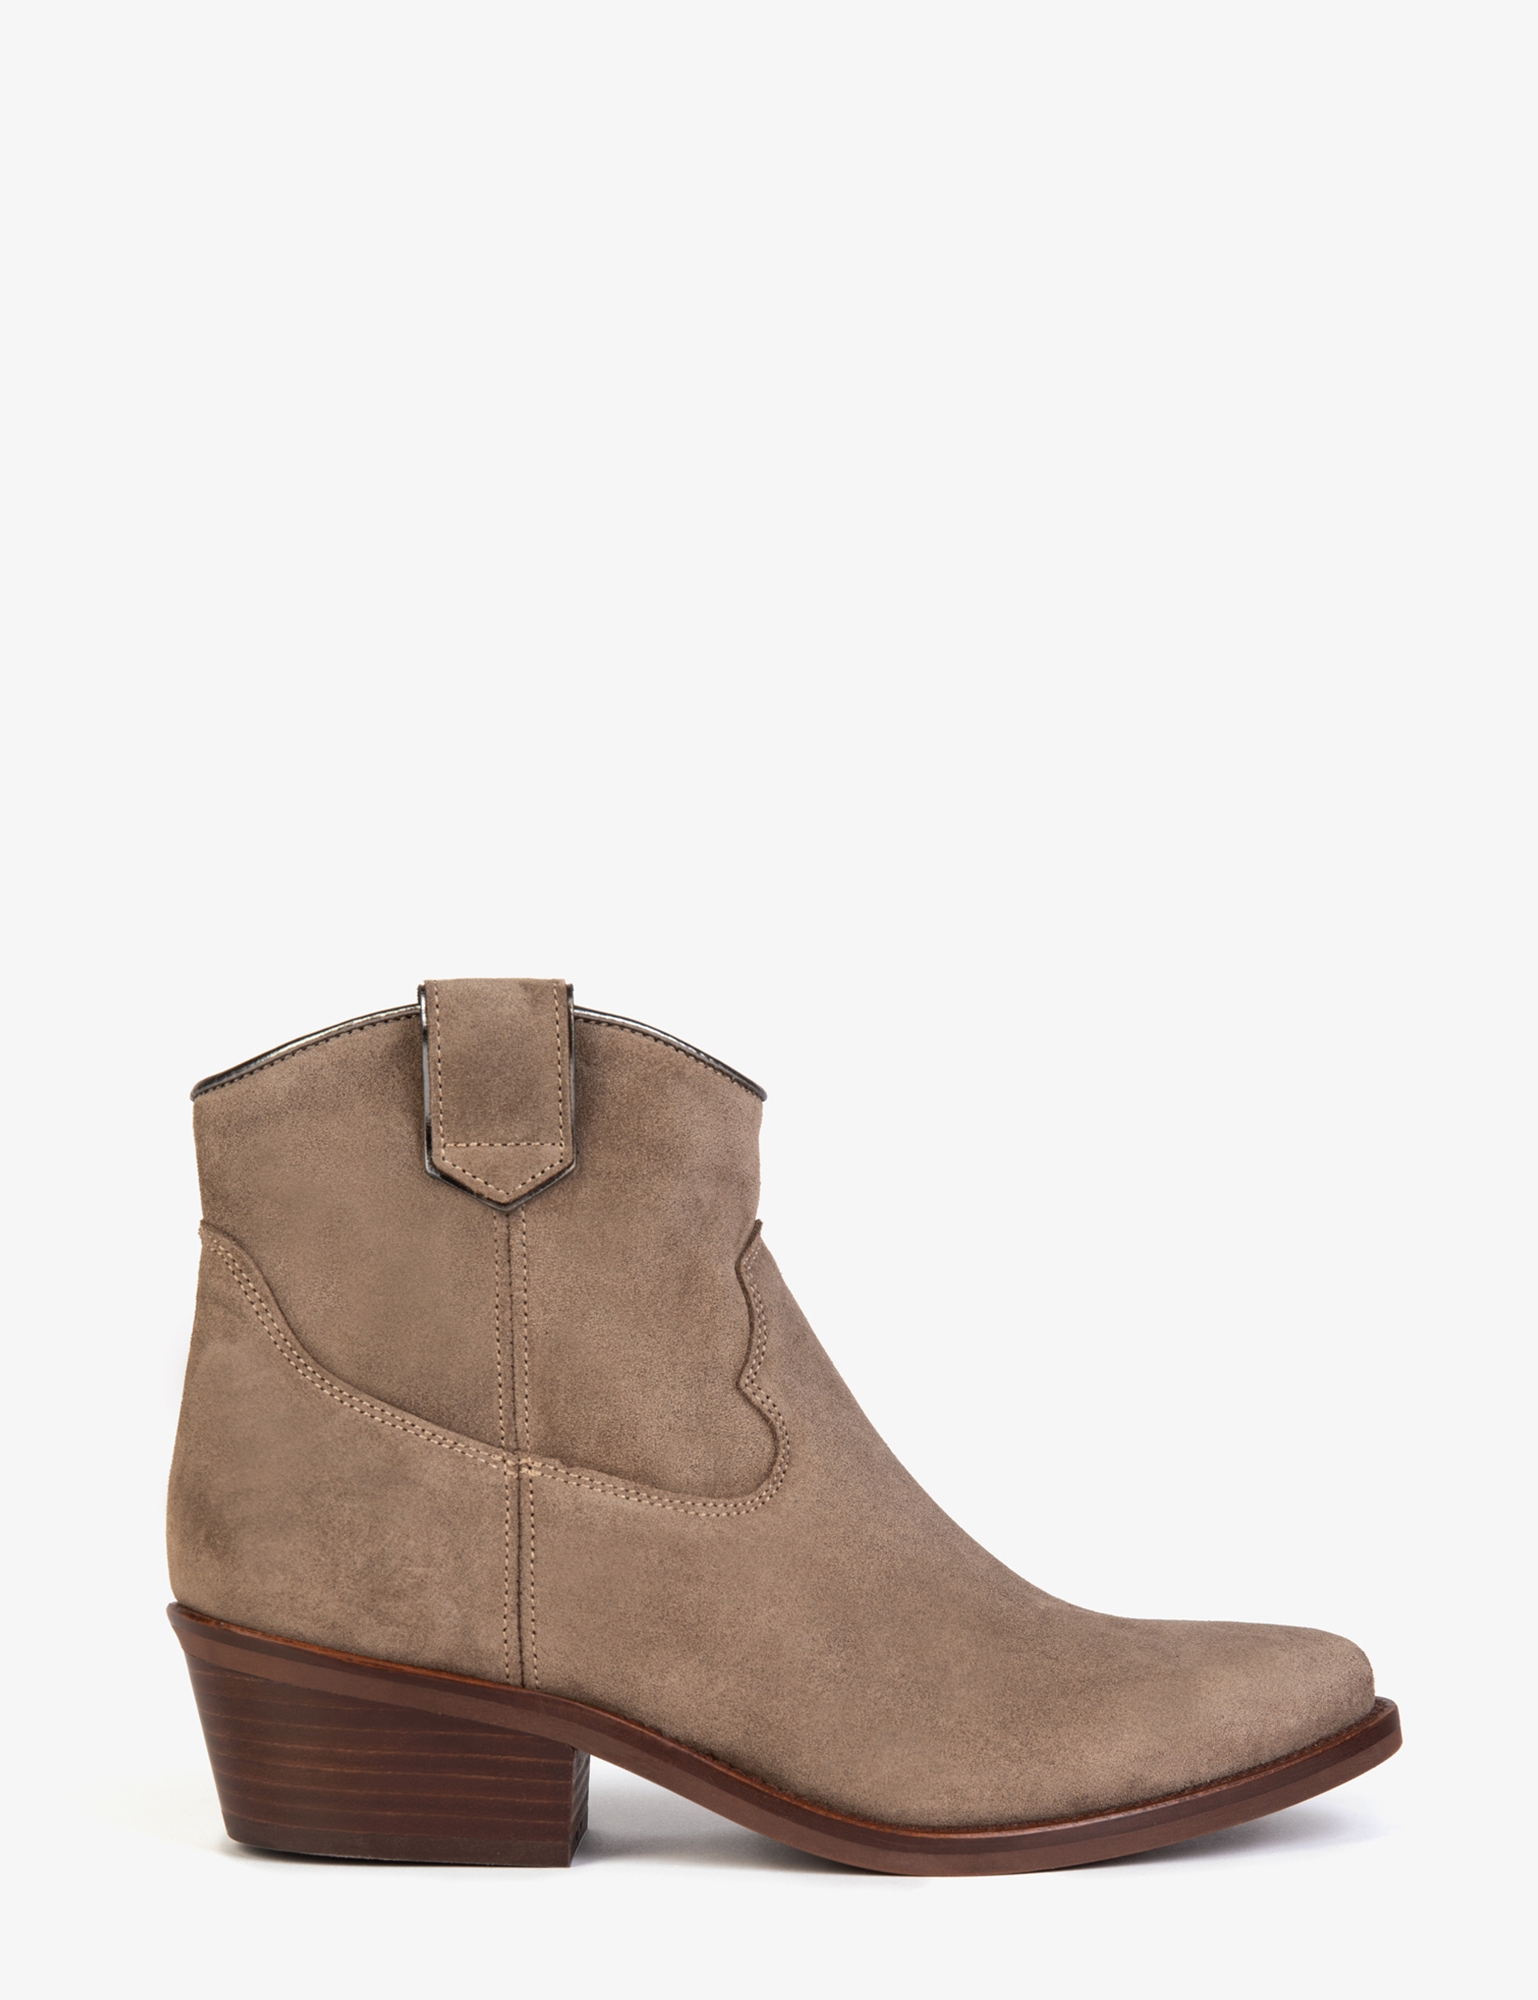 Cassidy Suede Cowboy Boot | Women's Boots | Penelope Chilvers